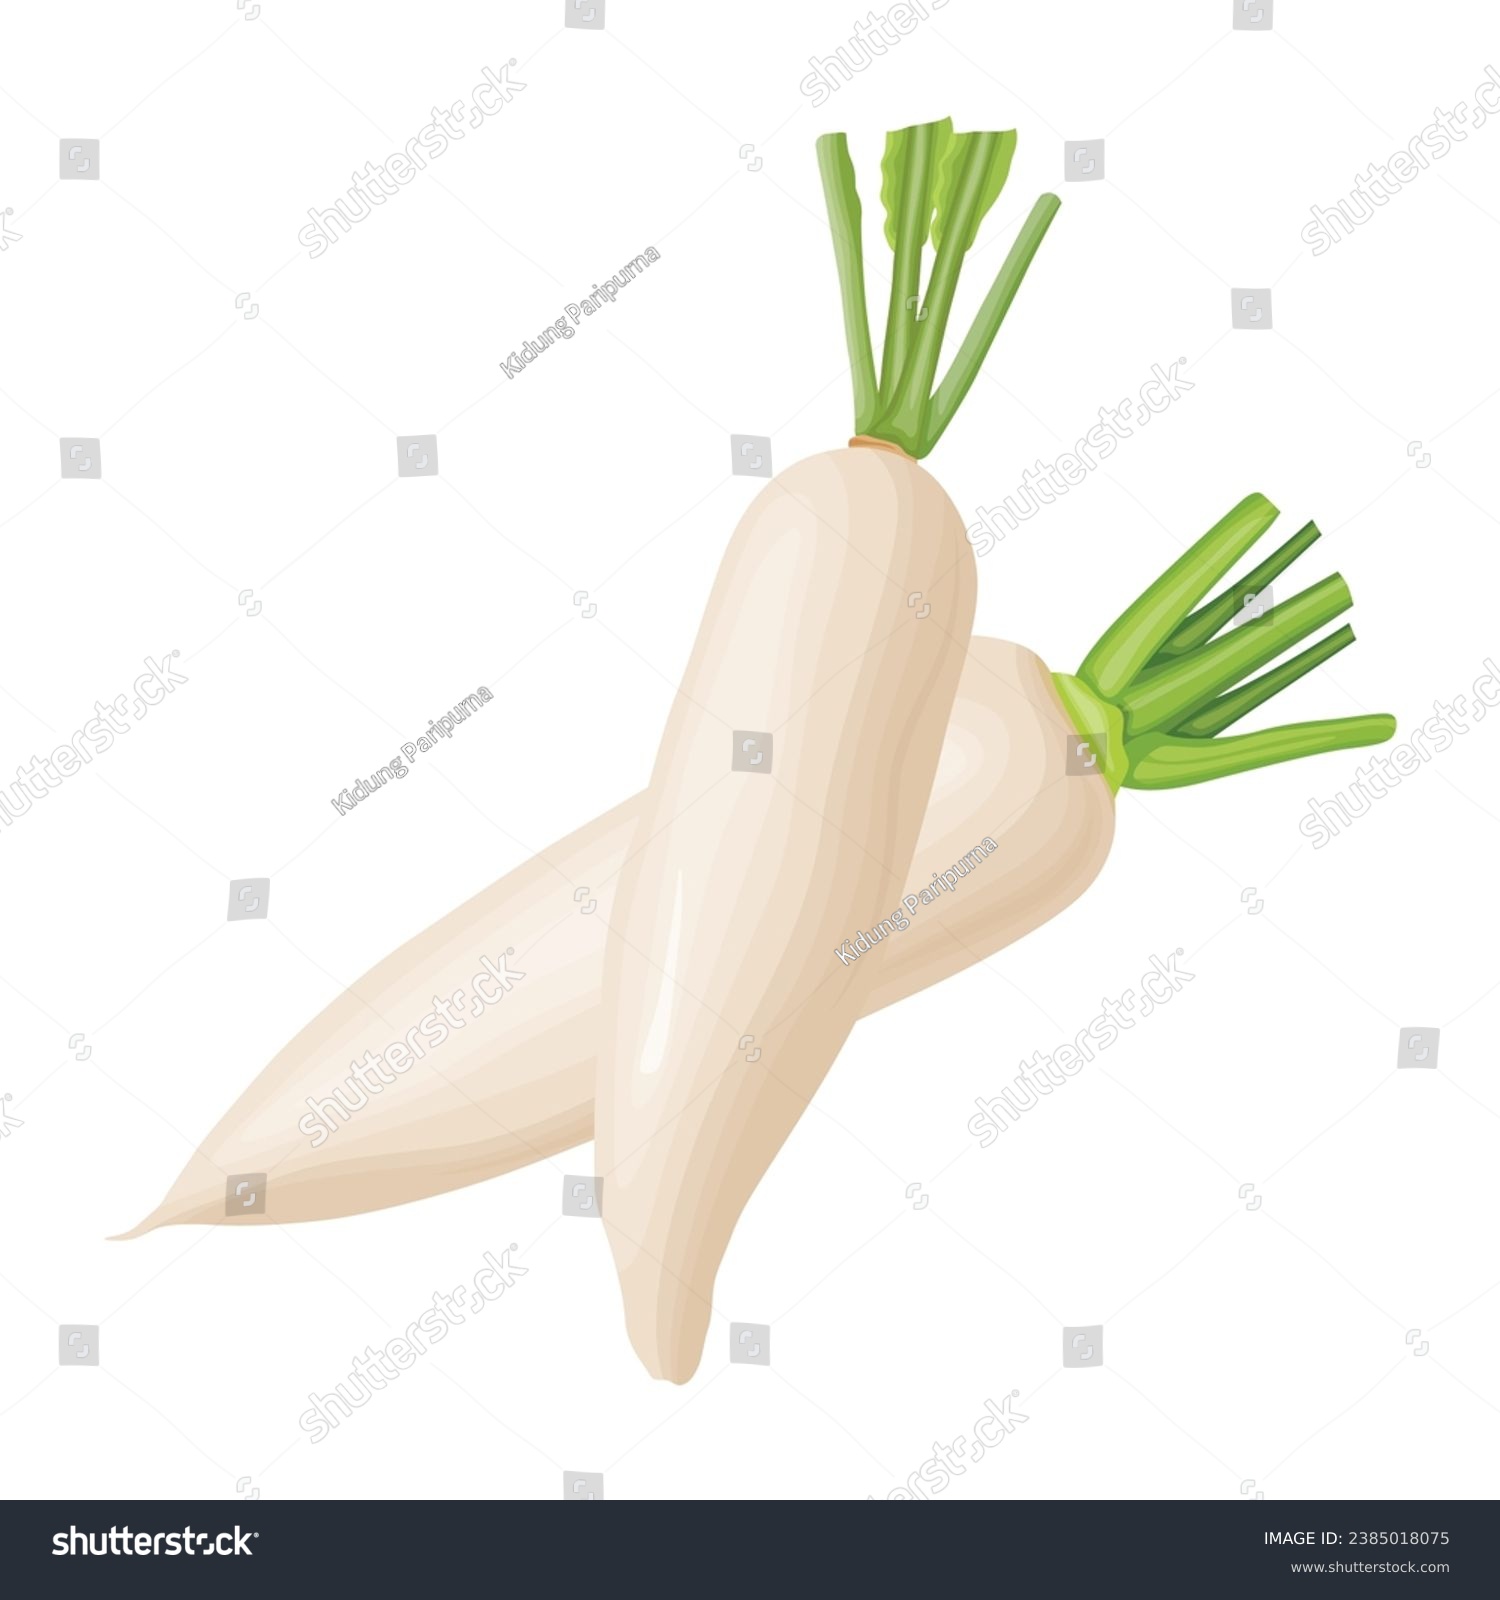 Vector illustration set of white daikon radishes in cartoon flat style. Root vegetable for banners, flyers, posters, cards. Whole, half, and sliced daikon radish. Japanese radon, White Chinese Radish #2385018075